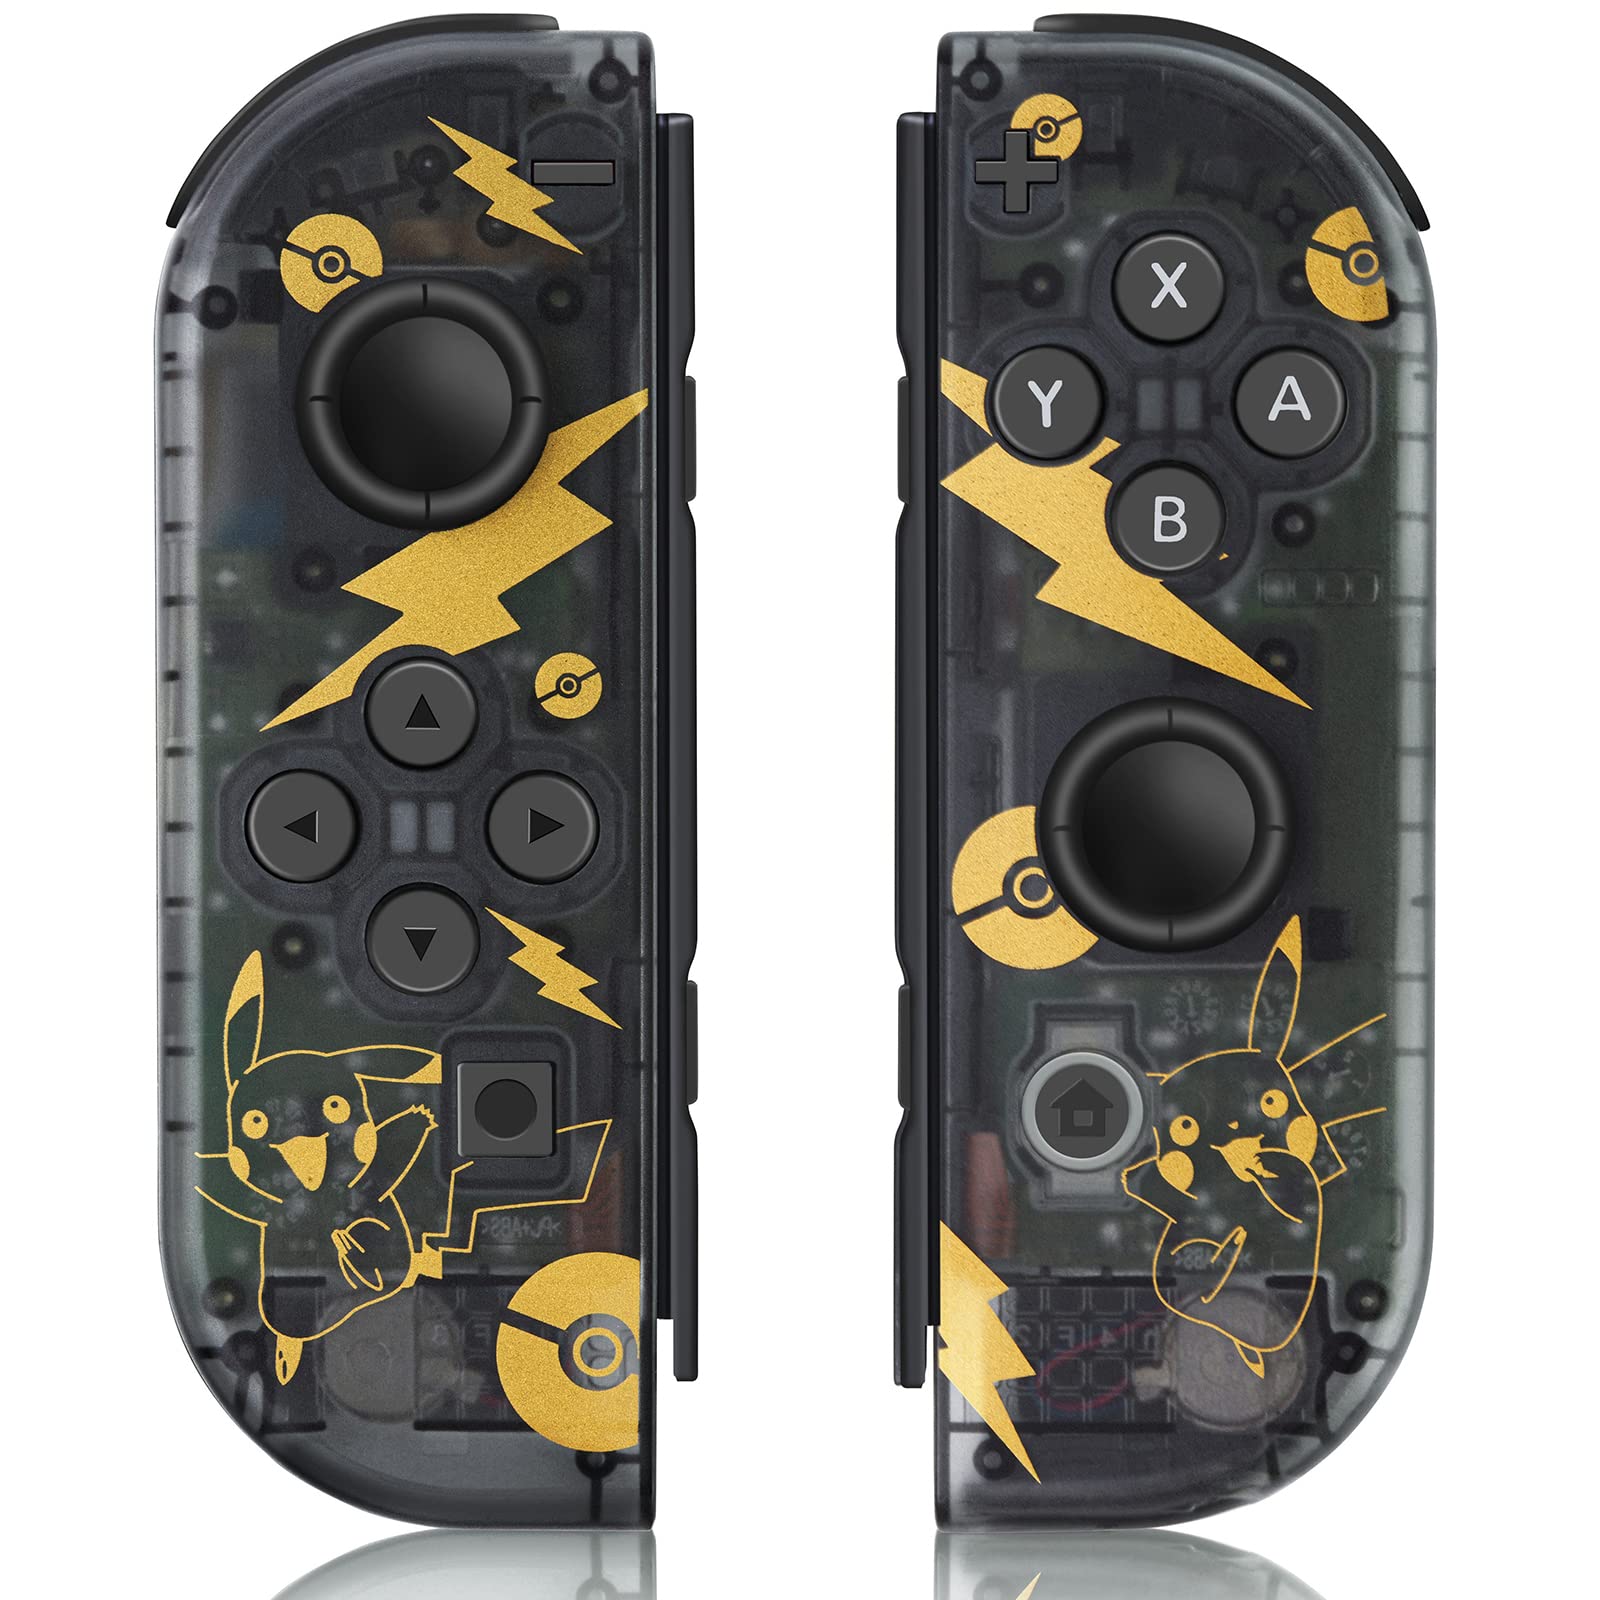 Joycons Controller Replacement for Nintendo Switch, L/R Switch Controllers for Nintendo Switch/Lite/OLED with Dual Vibration/Wake-up/Screenshot